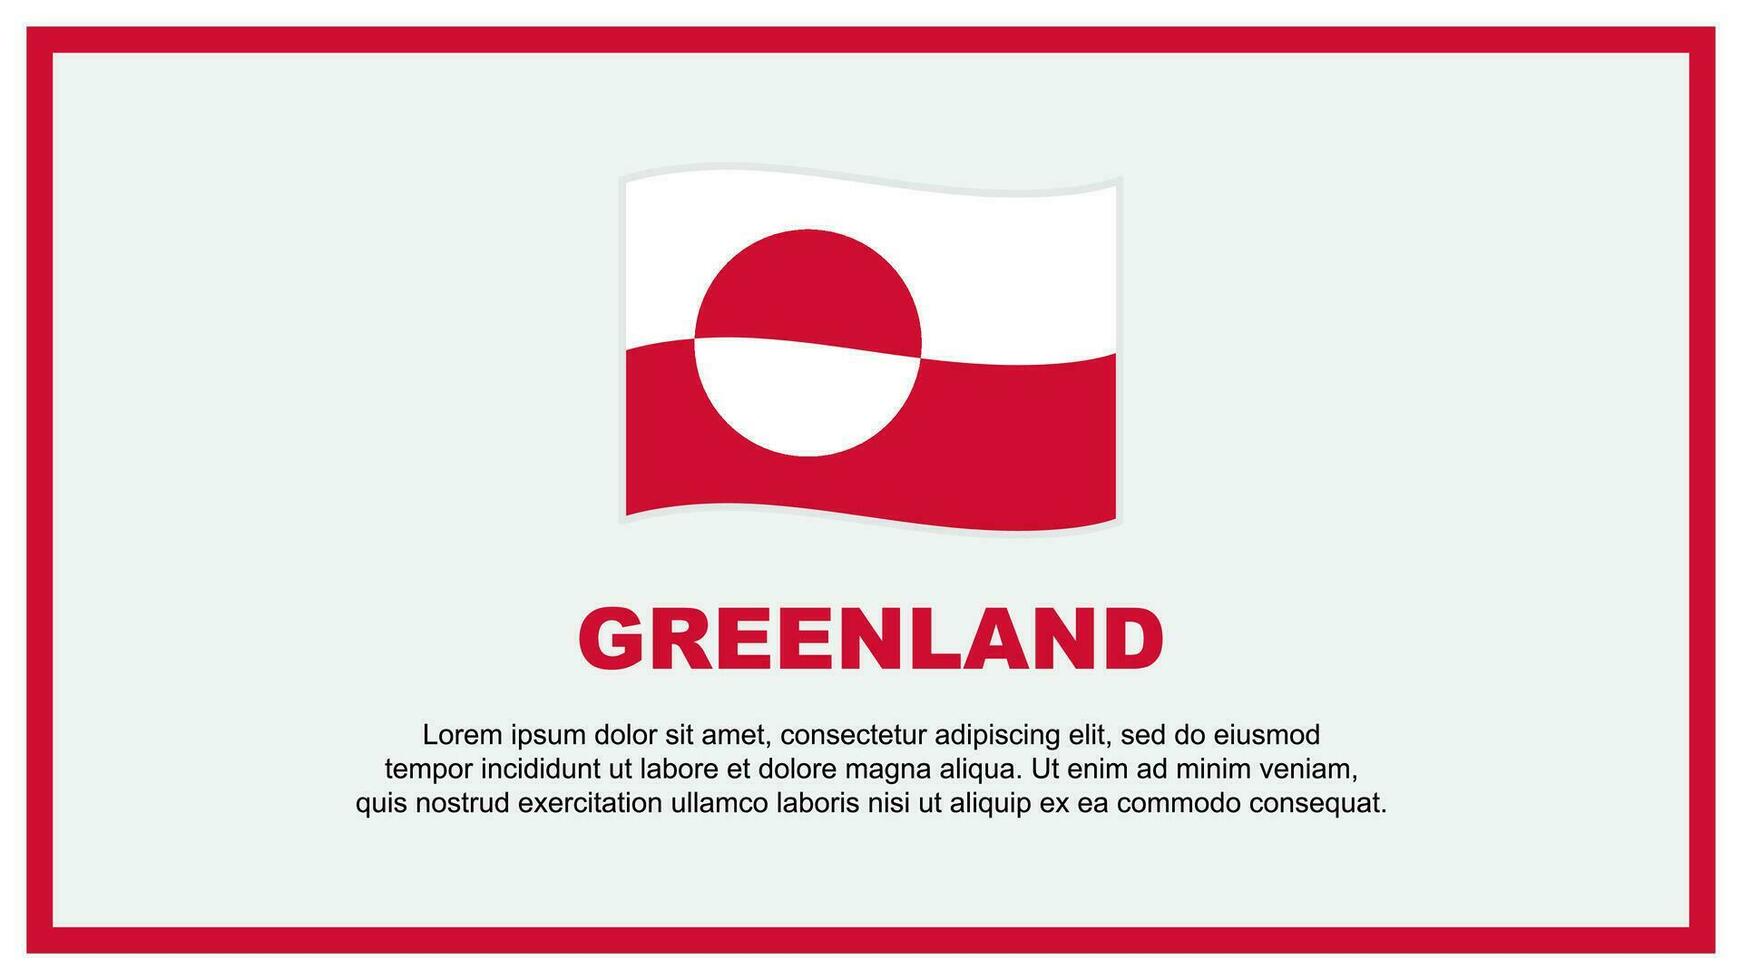 Greenland Flag Abstract Background Design Template. Greenland Independence Day Banner Social Media Vector Illustration. Greenland Banner